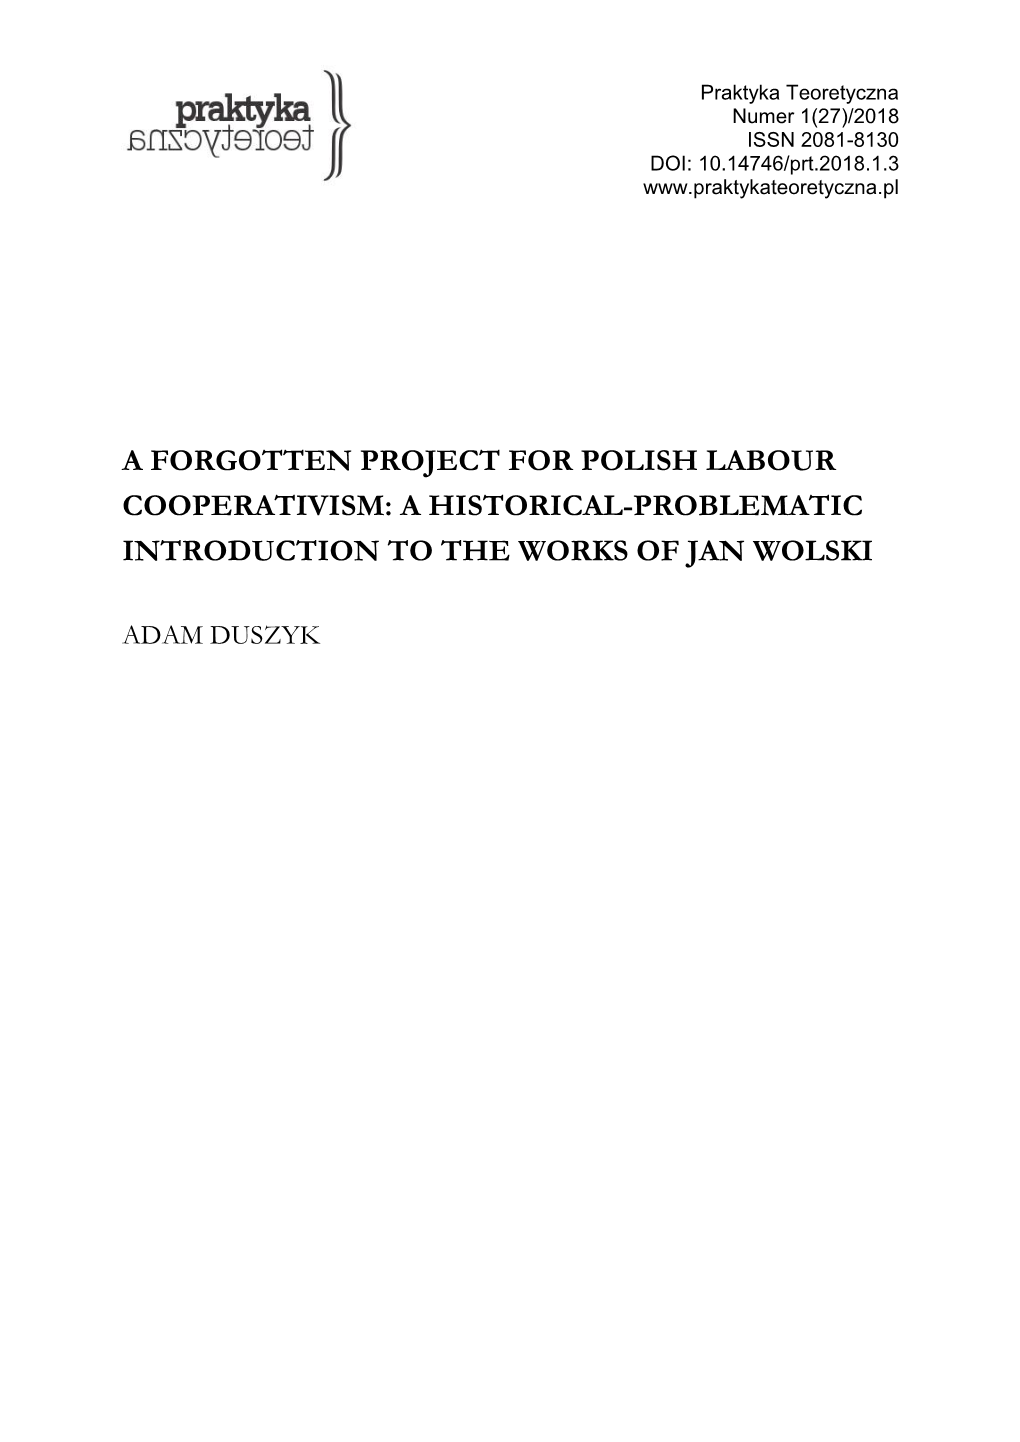 A Forgotten Project for Polish Labour Cooperativism: a Historical-Problematic Introduction to the Works of Jan Wolski